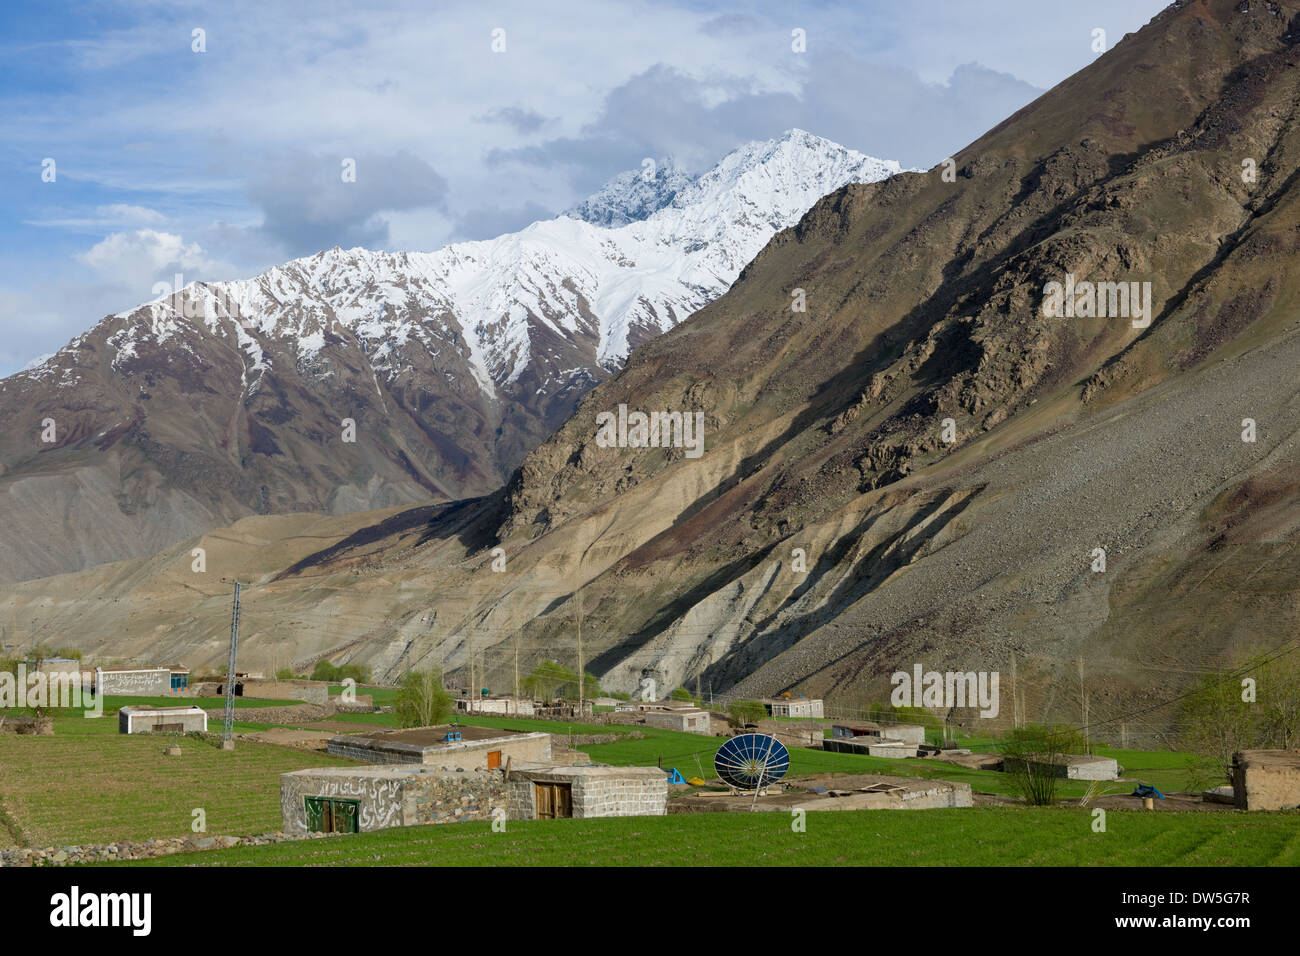 Large satellite dish outside of a house in the village of Teru, in the Ghizar River (Gilgit River) Valley, seen from the Shandur-Gilgit Road, near the Shandur Pass, Gilgit-Baltistan, Pakistan Stock Photo